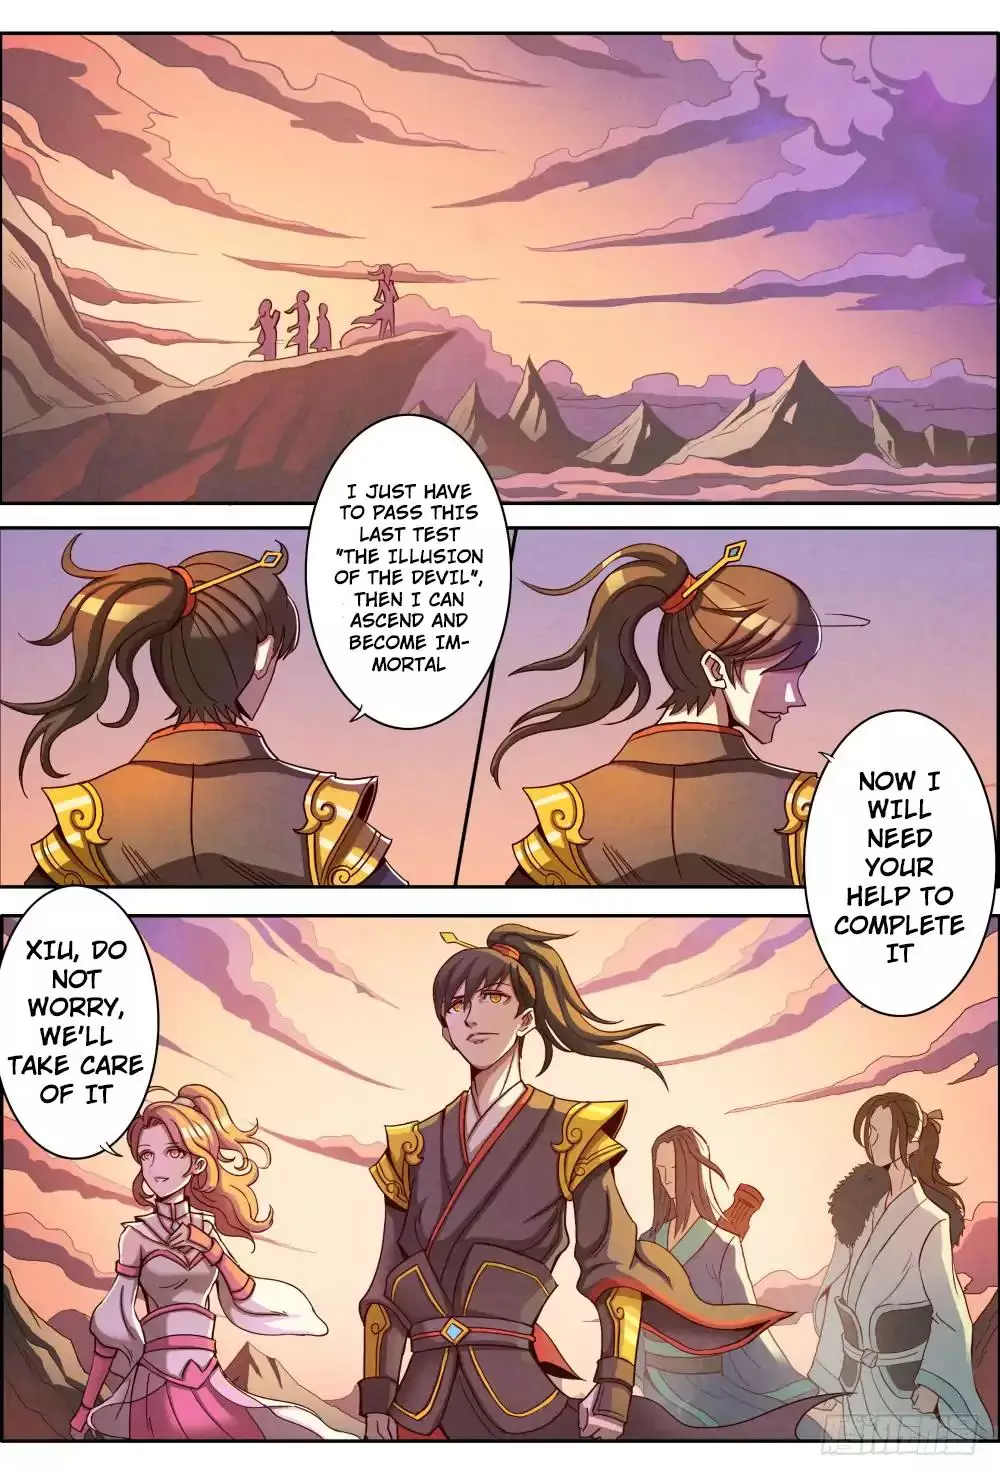 Return From the World of Immortals - 1 page 2